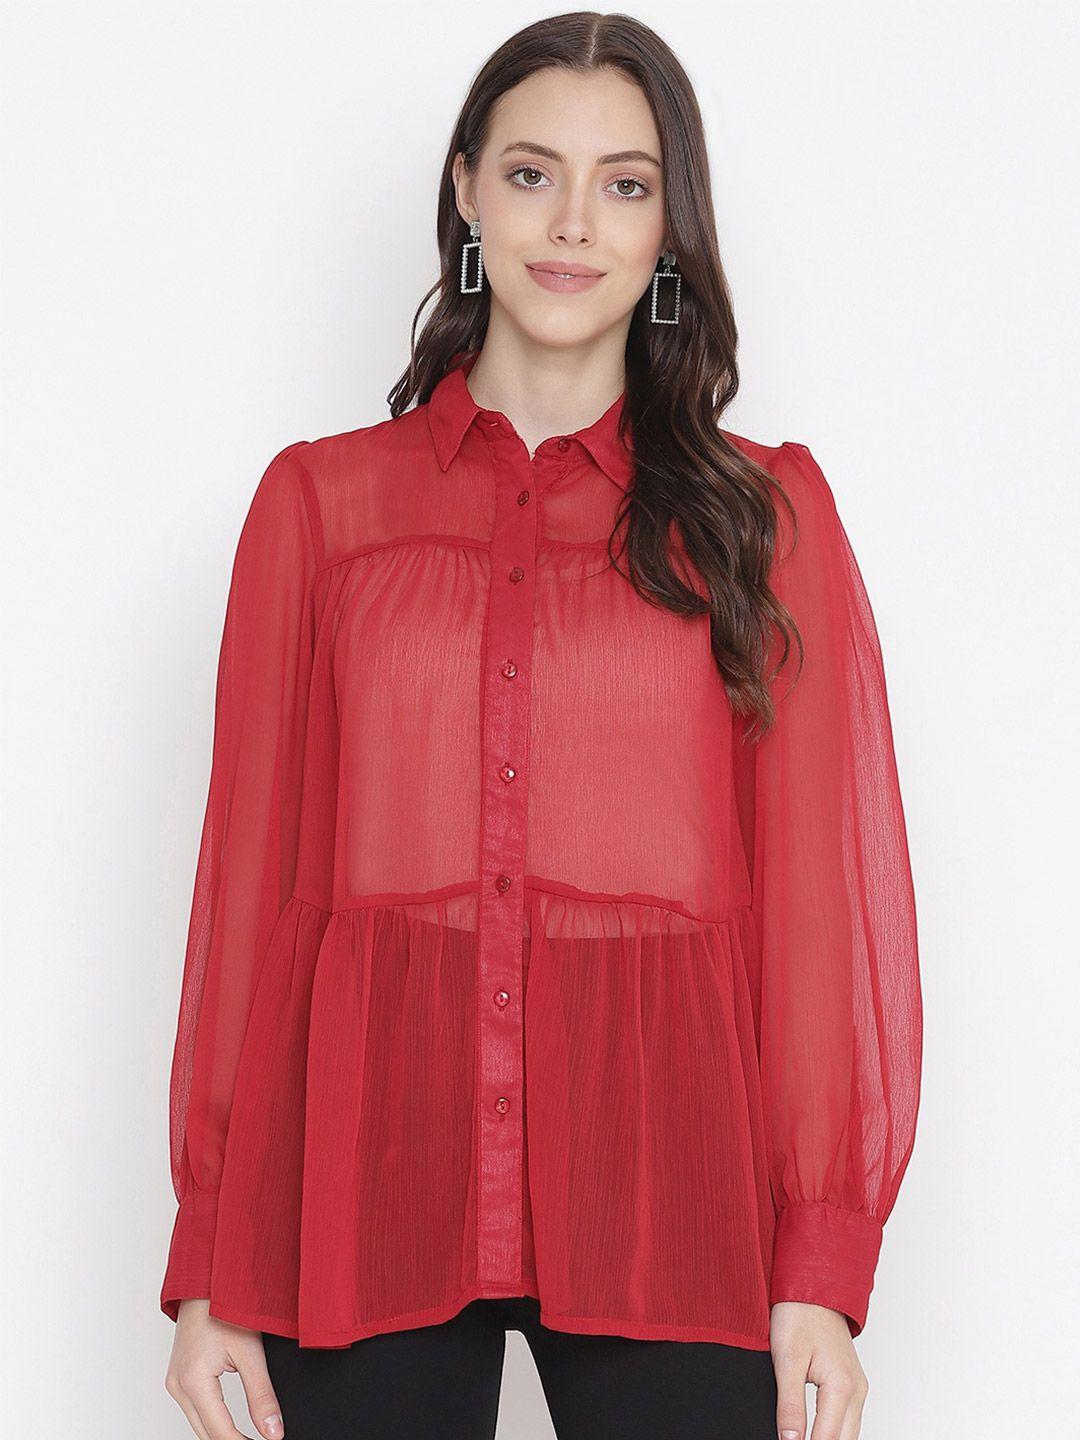 oxolloxo women red solid sheer comfort casual shirt